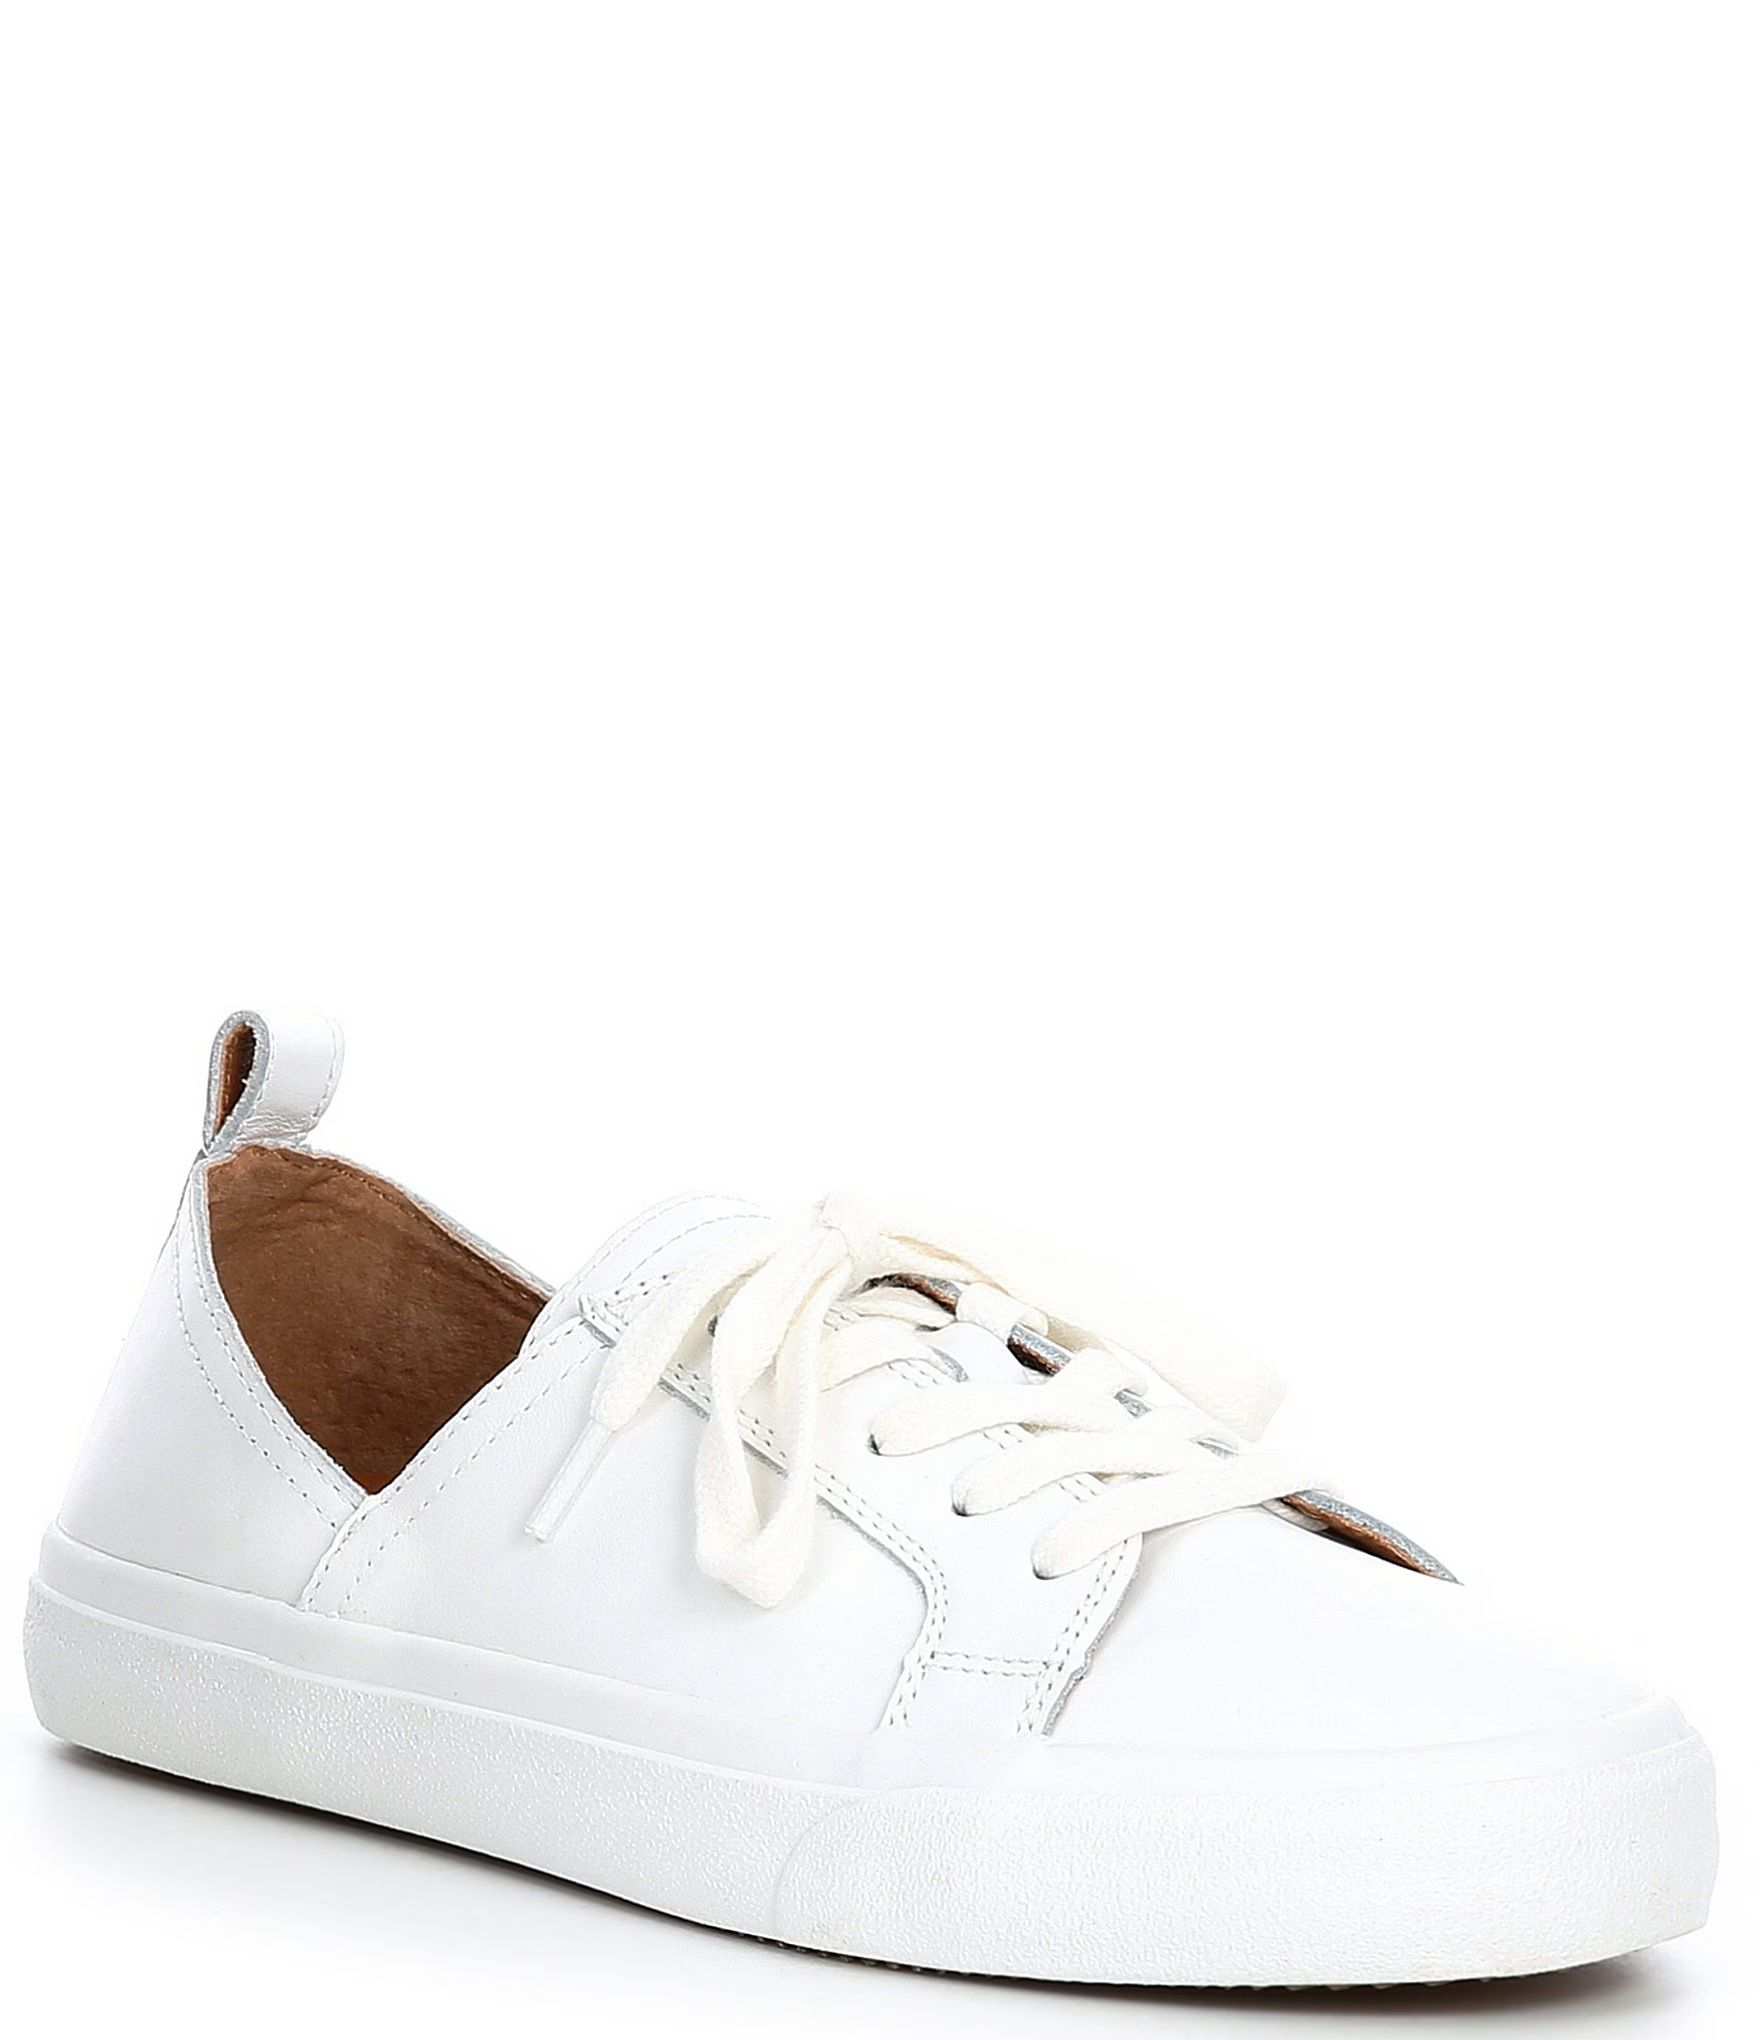 Dansbey Leather Side Dip Lace-Up Sneakers | Dillard's